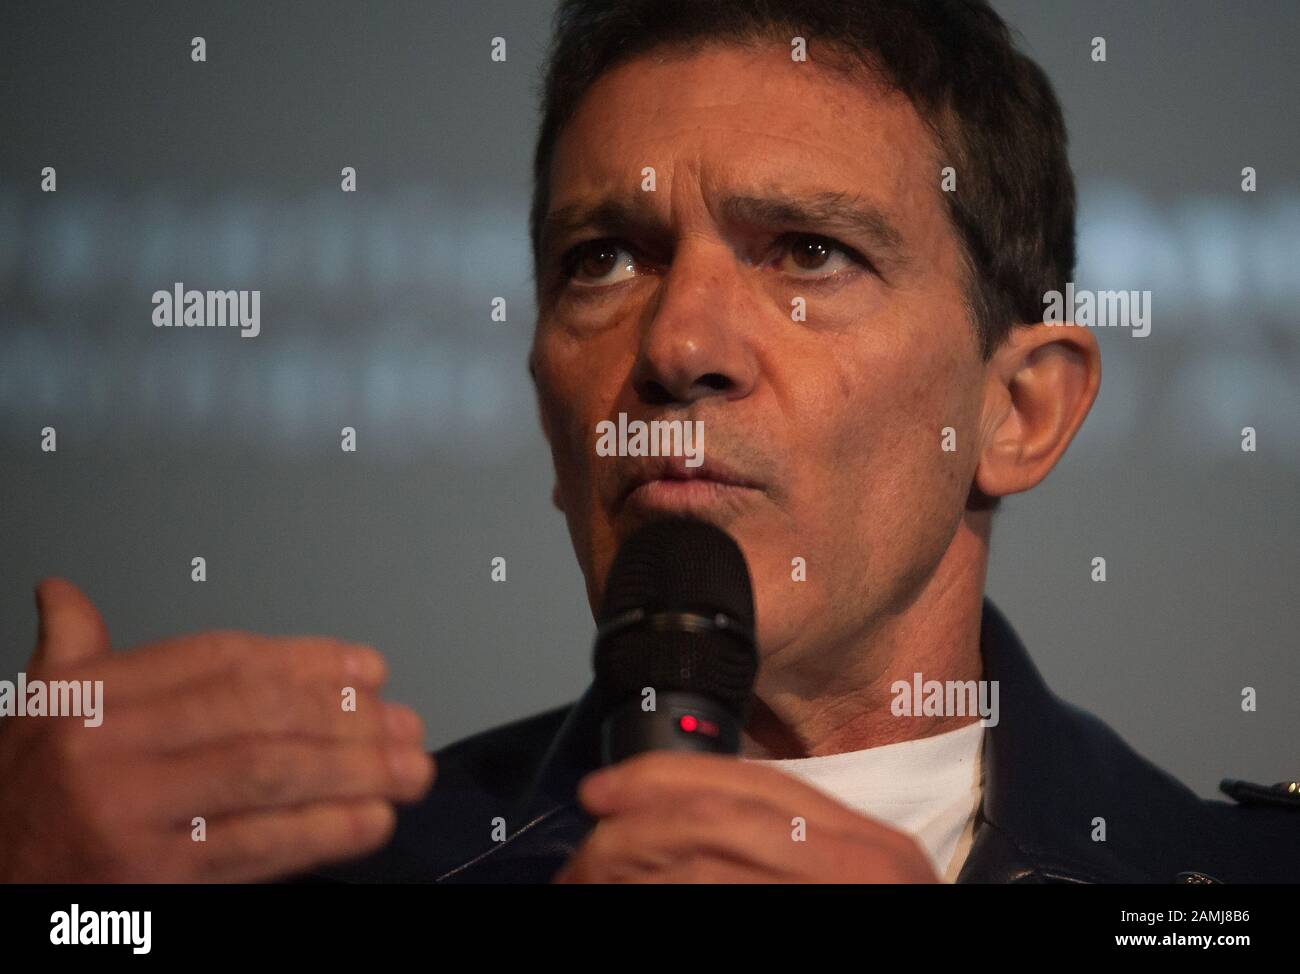 Spanish actor and director Antonio Banderas, who was nominated to receive the Spanish Goya Award and Academy Award of the best actor speaks during a promotional event to presents the screening of the film "Dolor y Gloria" (Pain and Glory) directed by the Spanish director Pedro Almodovar at Albeniz Cinema, as part of activities of the Spanish Film Academy's Goya Awards ceremony. The Malaga city welcomes to Goya Awards Ceremony (which is celebrated on 25 January) with photographic exhibitions and previous screenings of films nominated to receive the Goya Award of the best film. Stock Photo